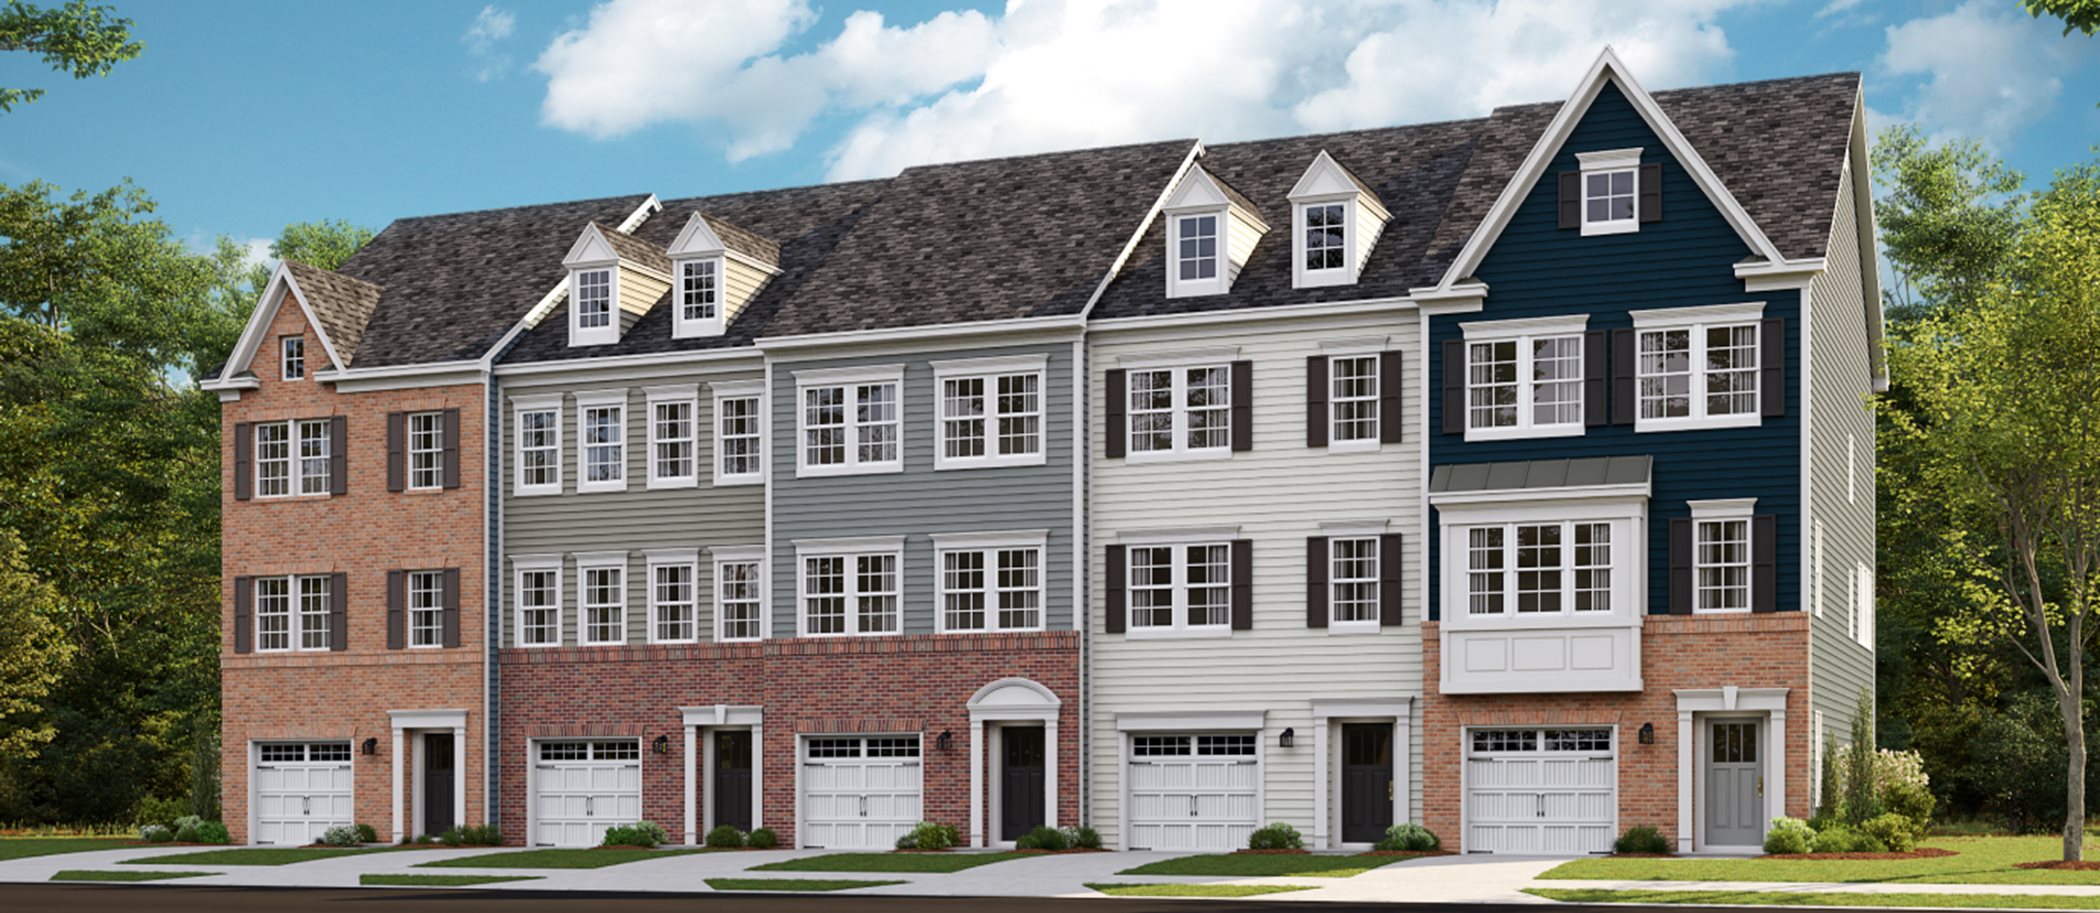 Streetscape at Sycamore Ridge Townhomes